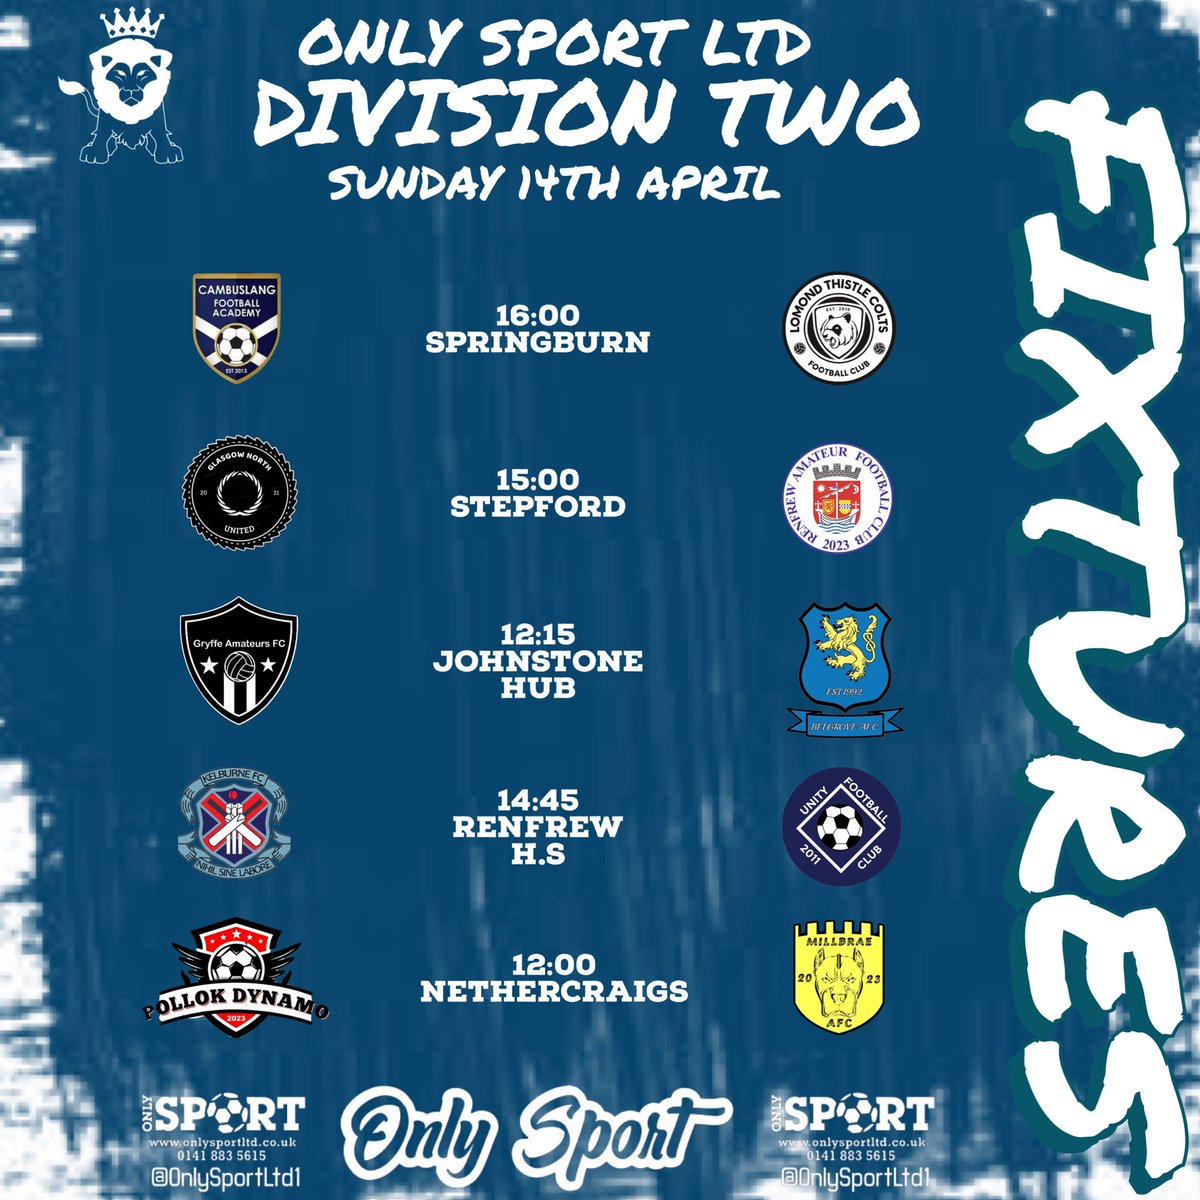 Today’s fixtures in each of our @OnlySportLTD1 divisions… @ScotAmFA @scottish_aff @refsix @ftsc0res @SnJsFootyFocus